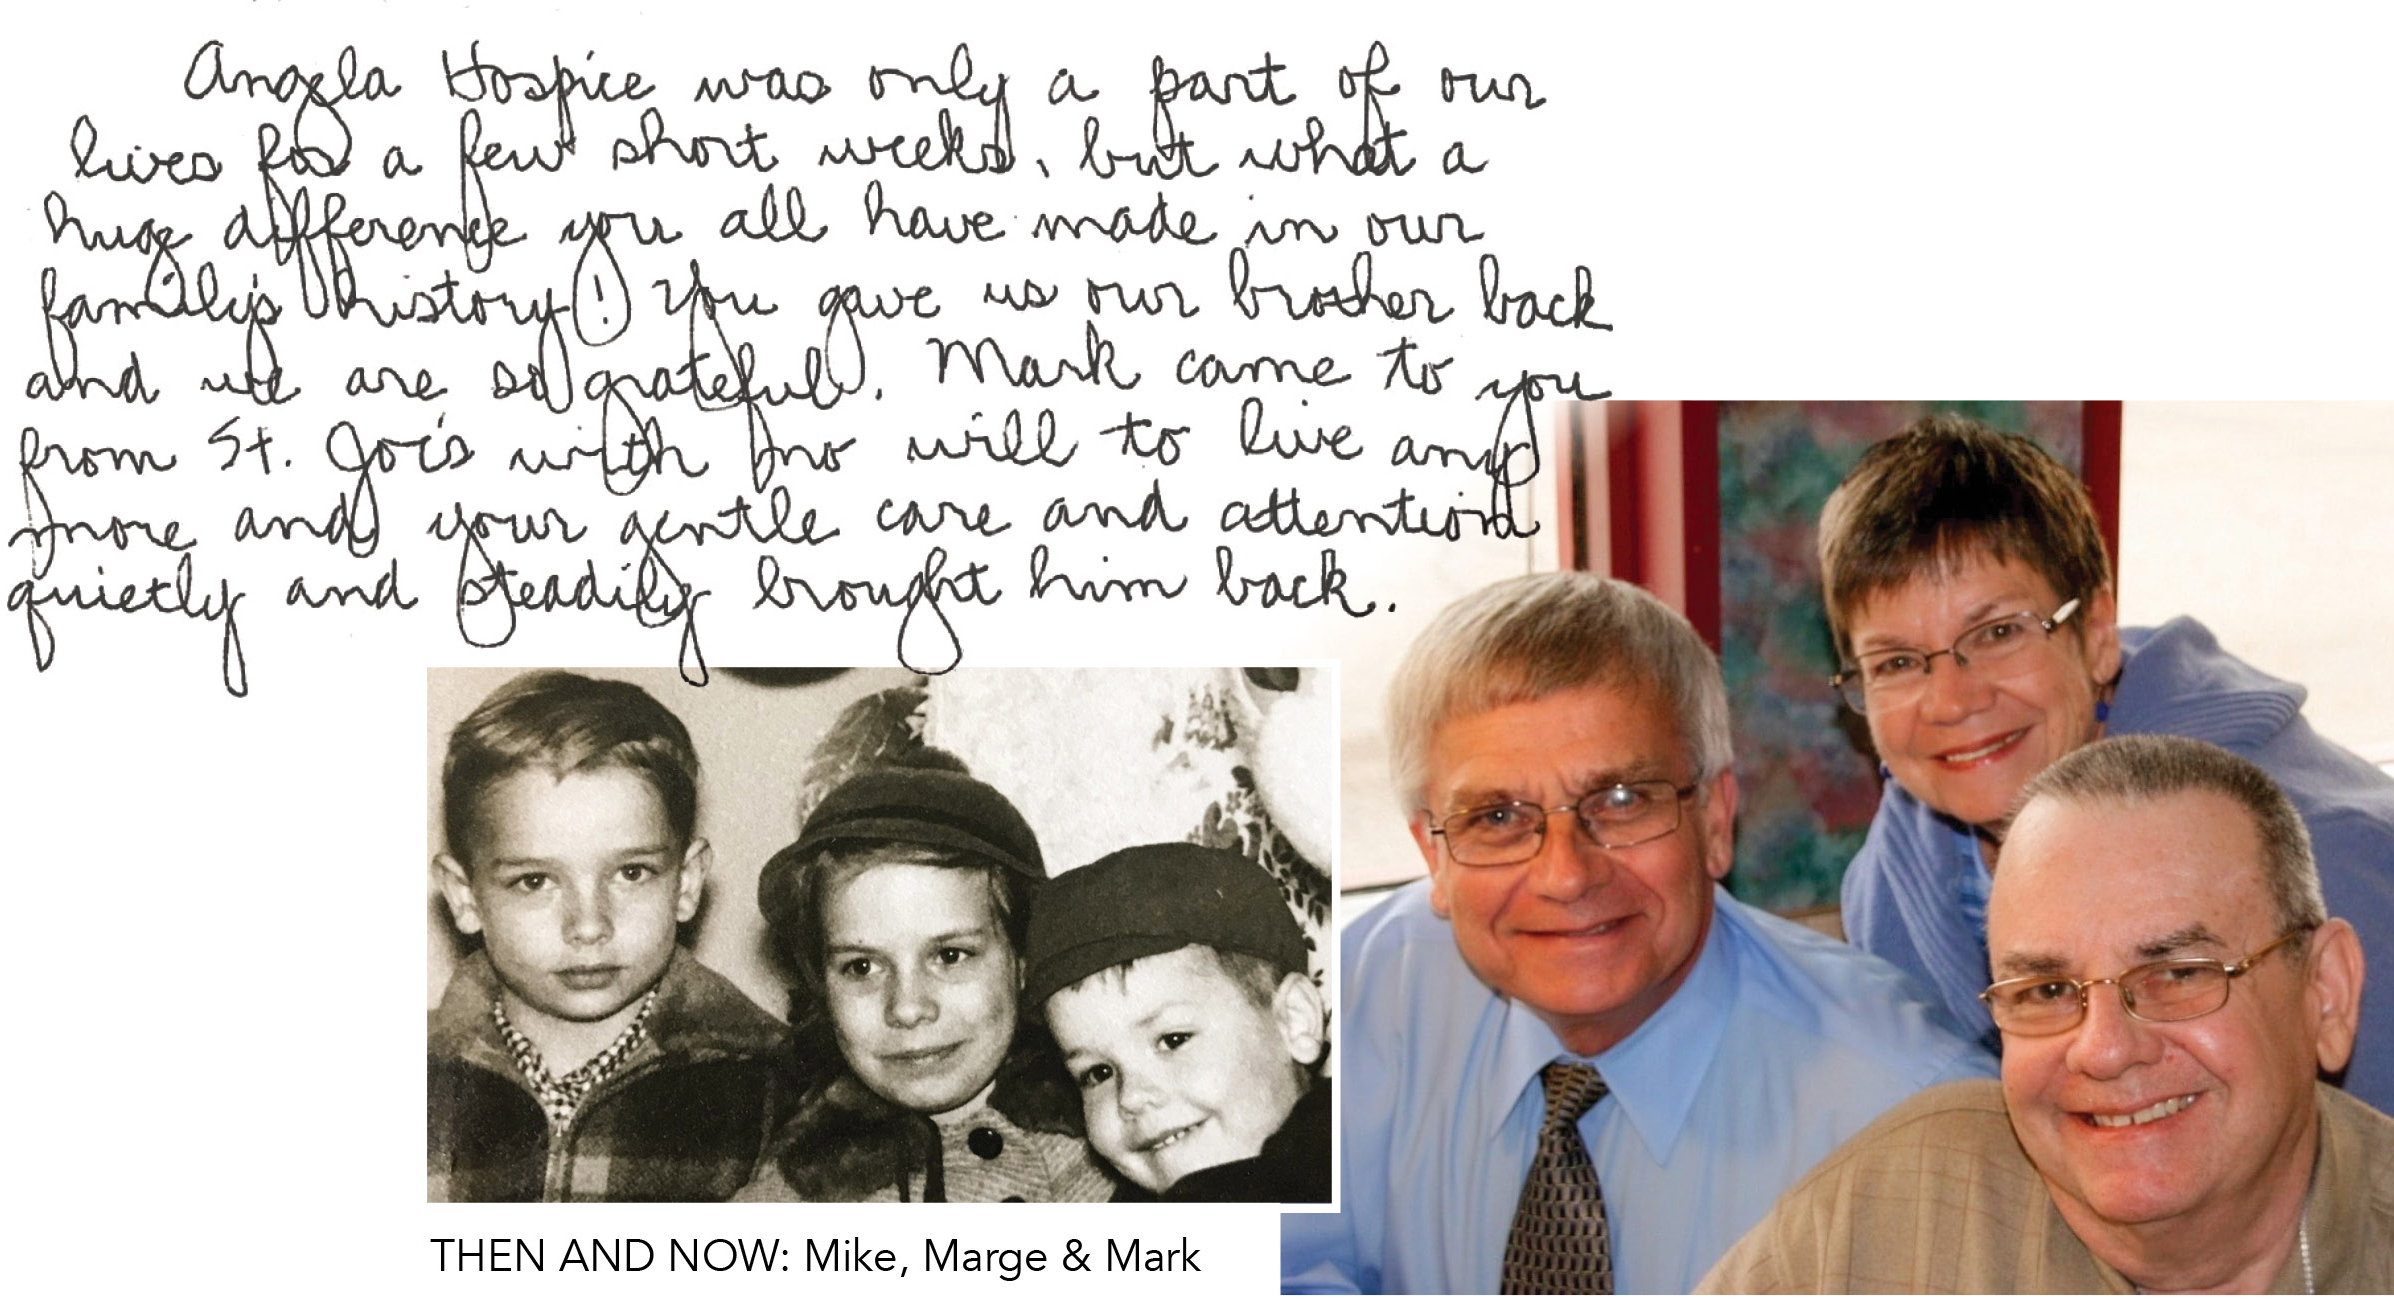 Siblings Mike Kress, Marge Hamilton, and Mark Kress as children and now as adults.